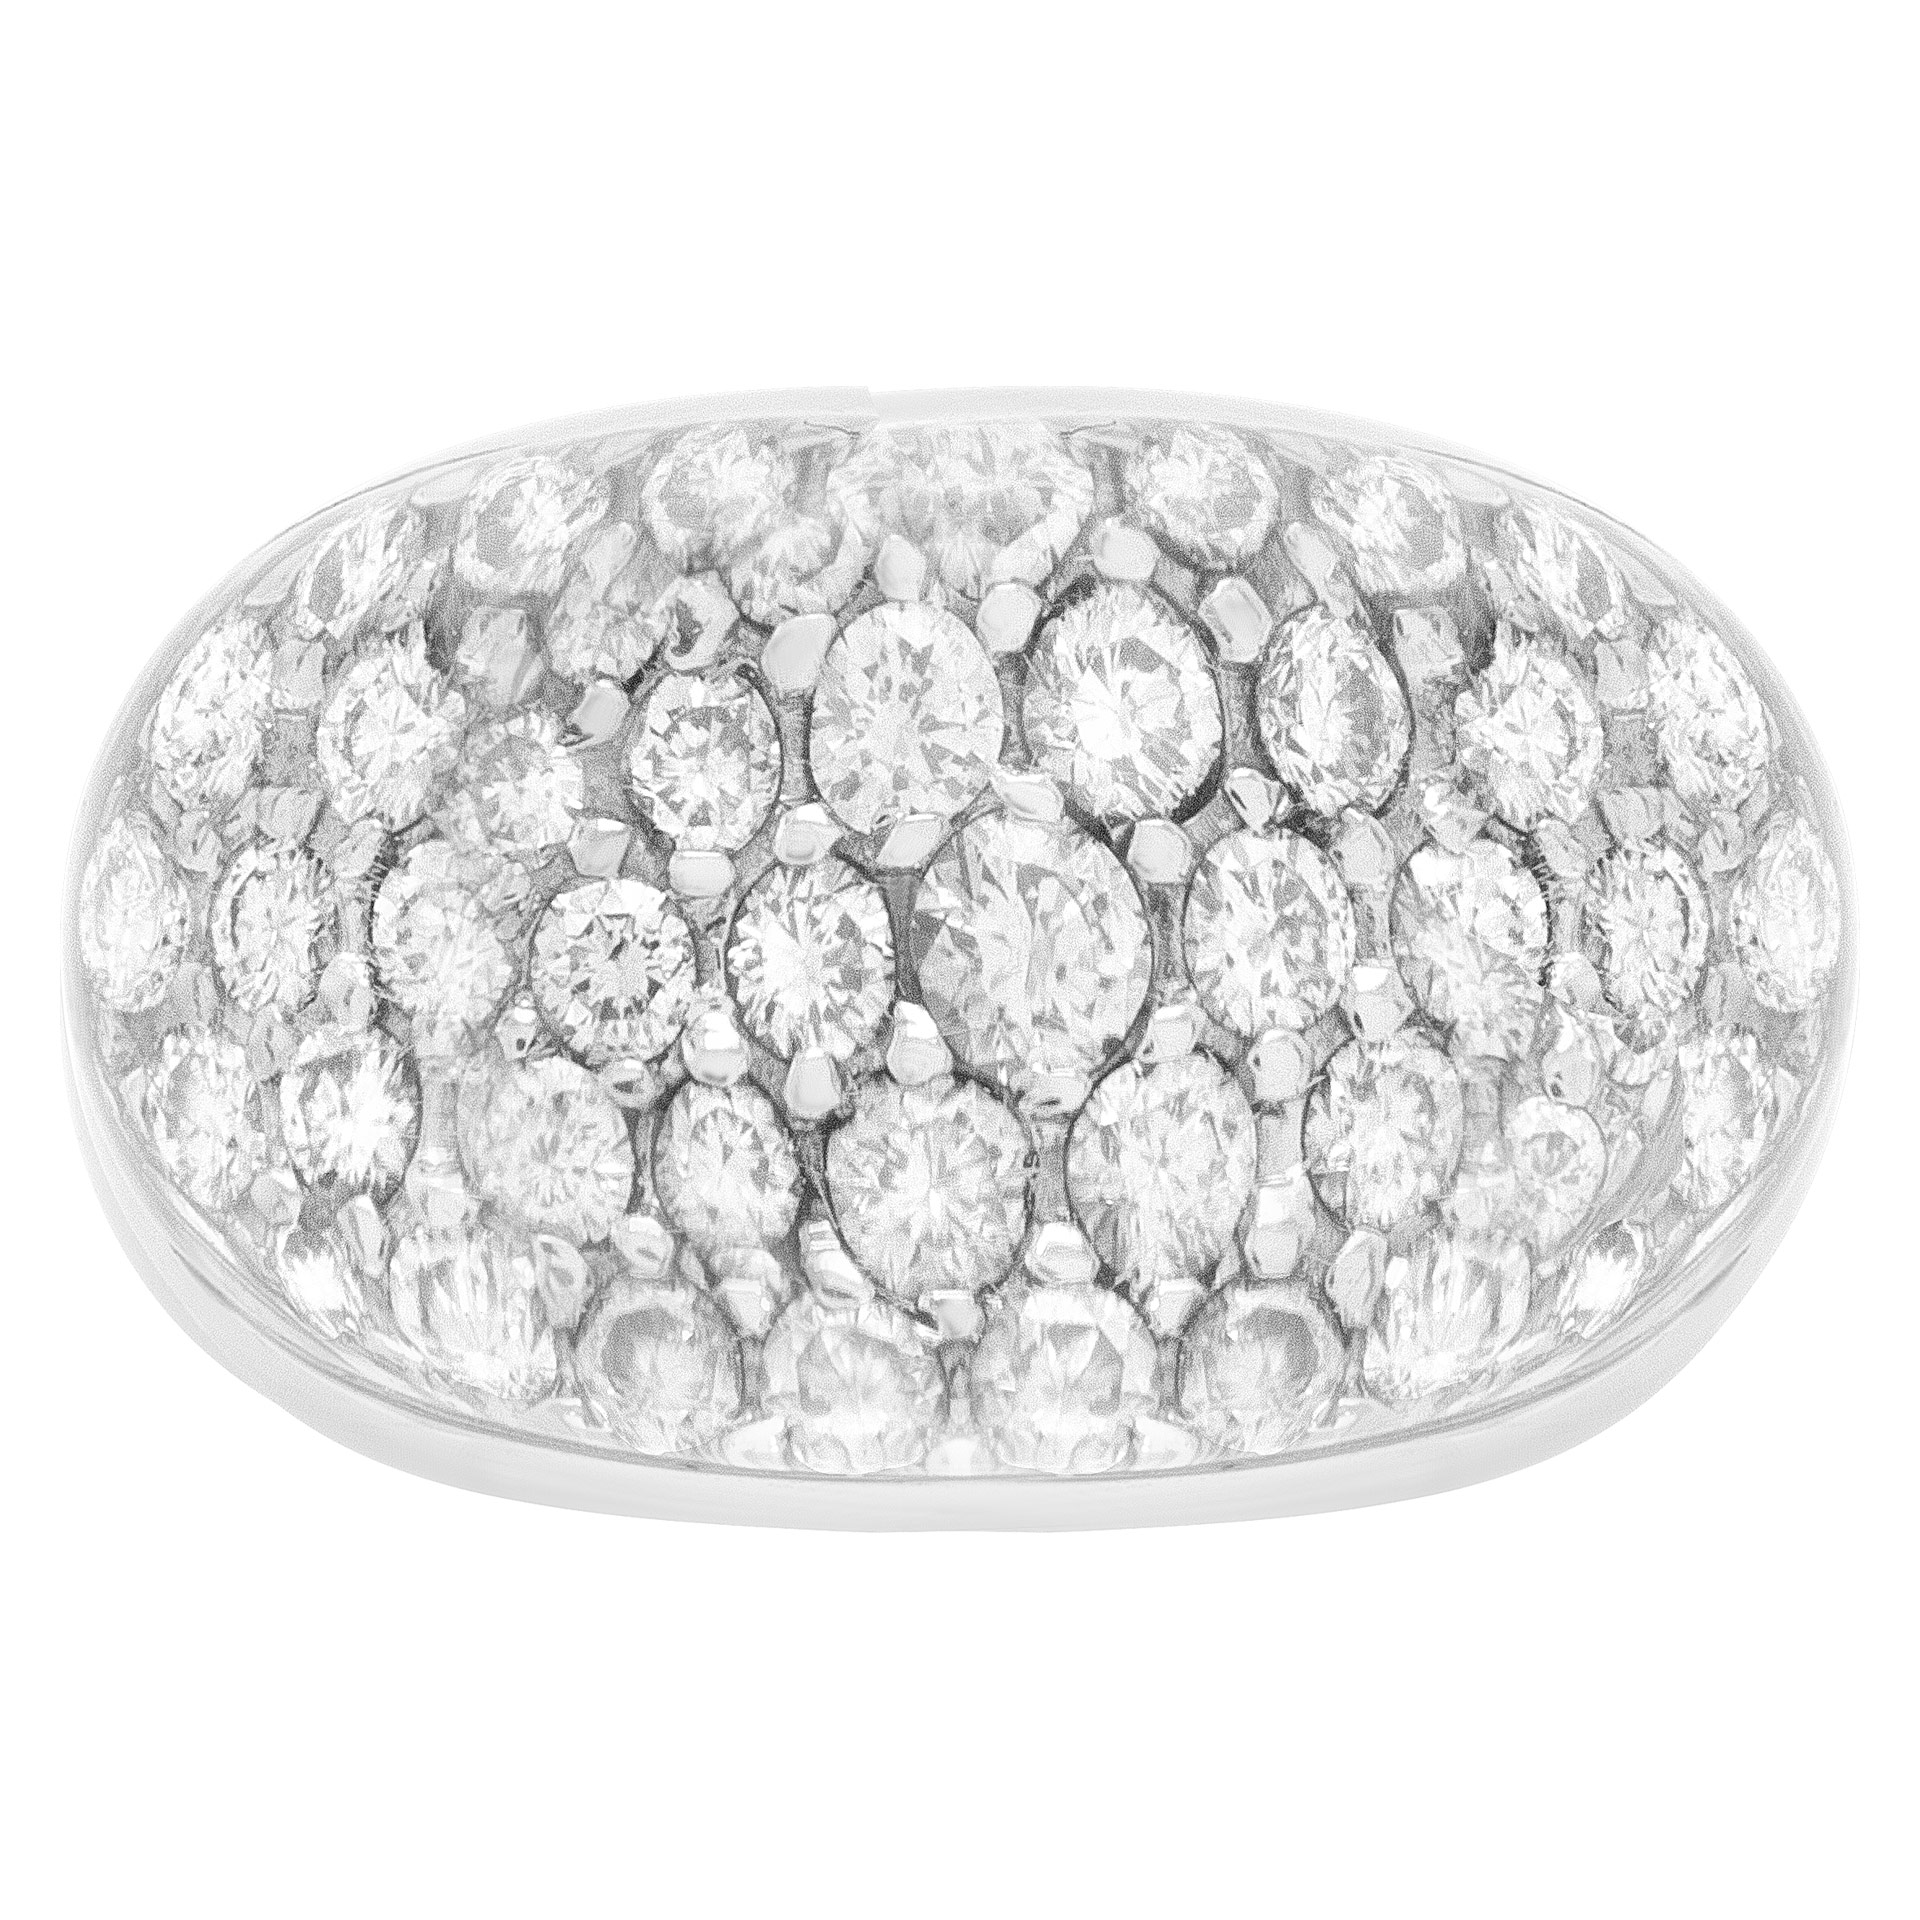 18k white gold pave diamonds & crystal dome ring